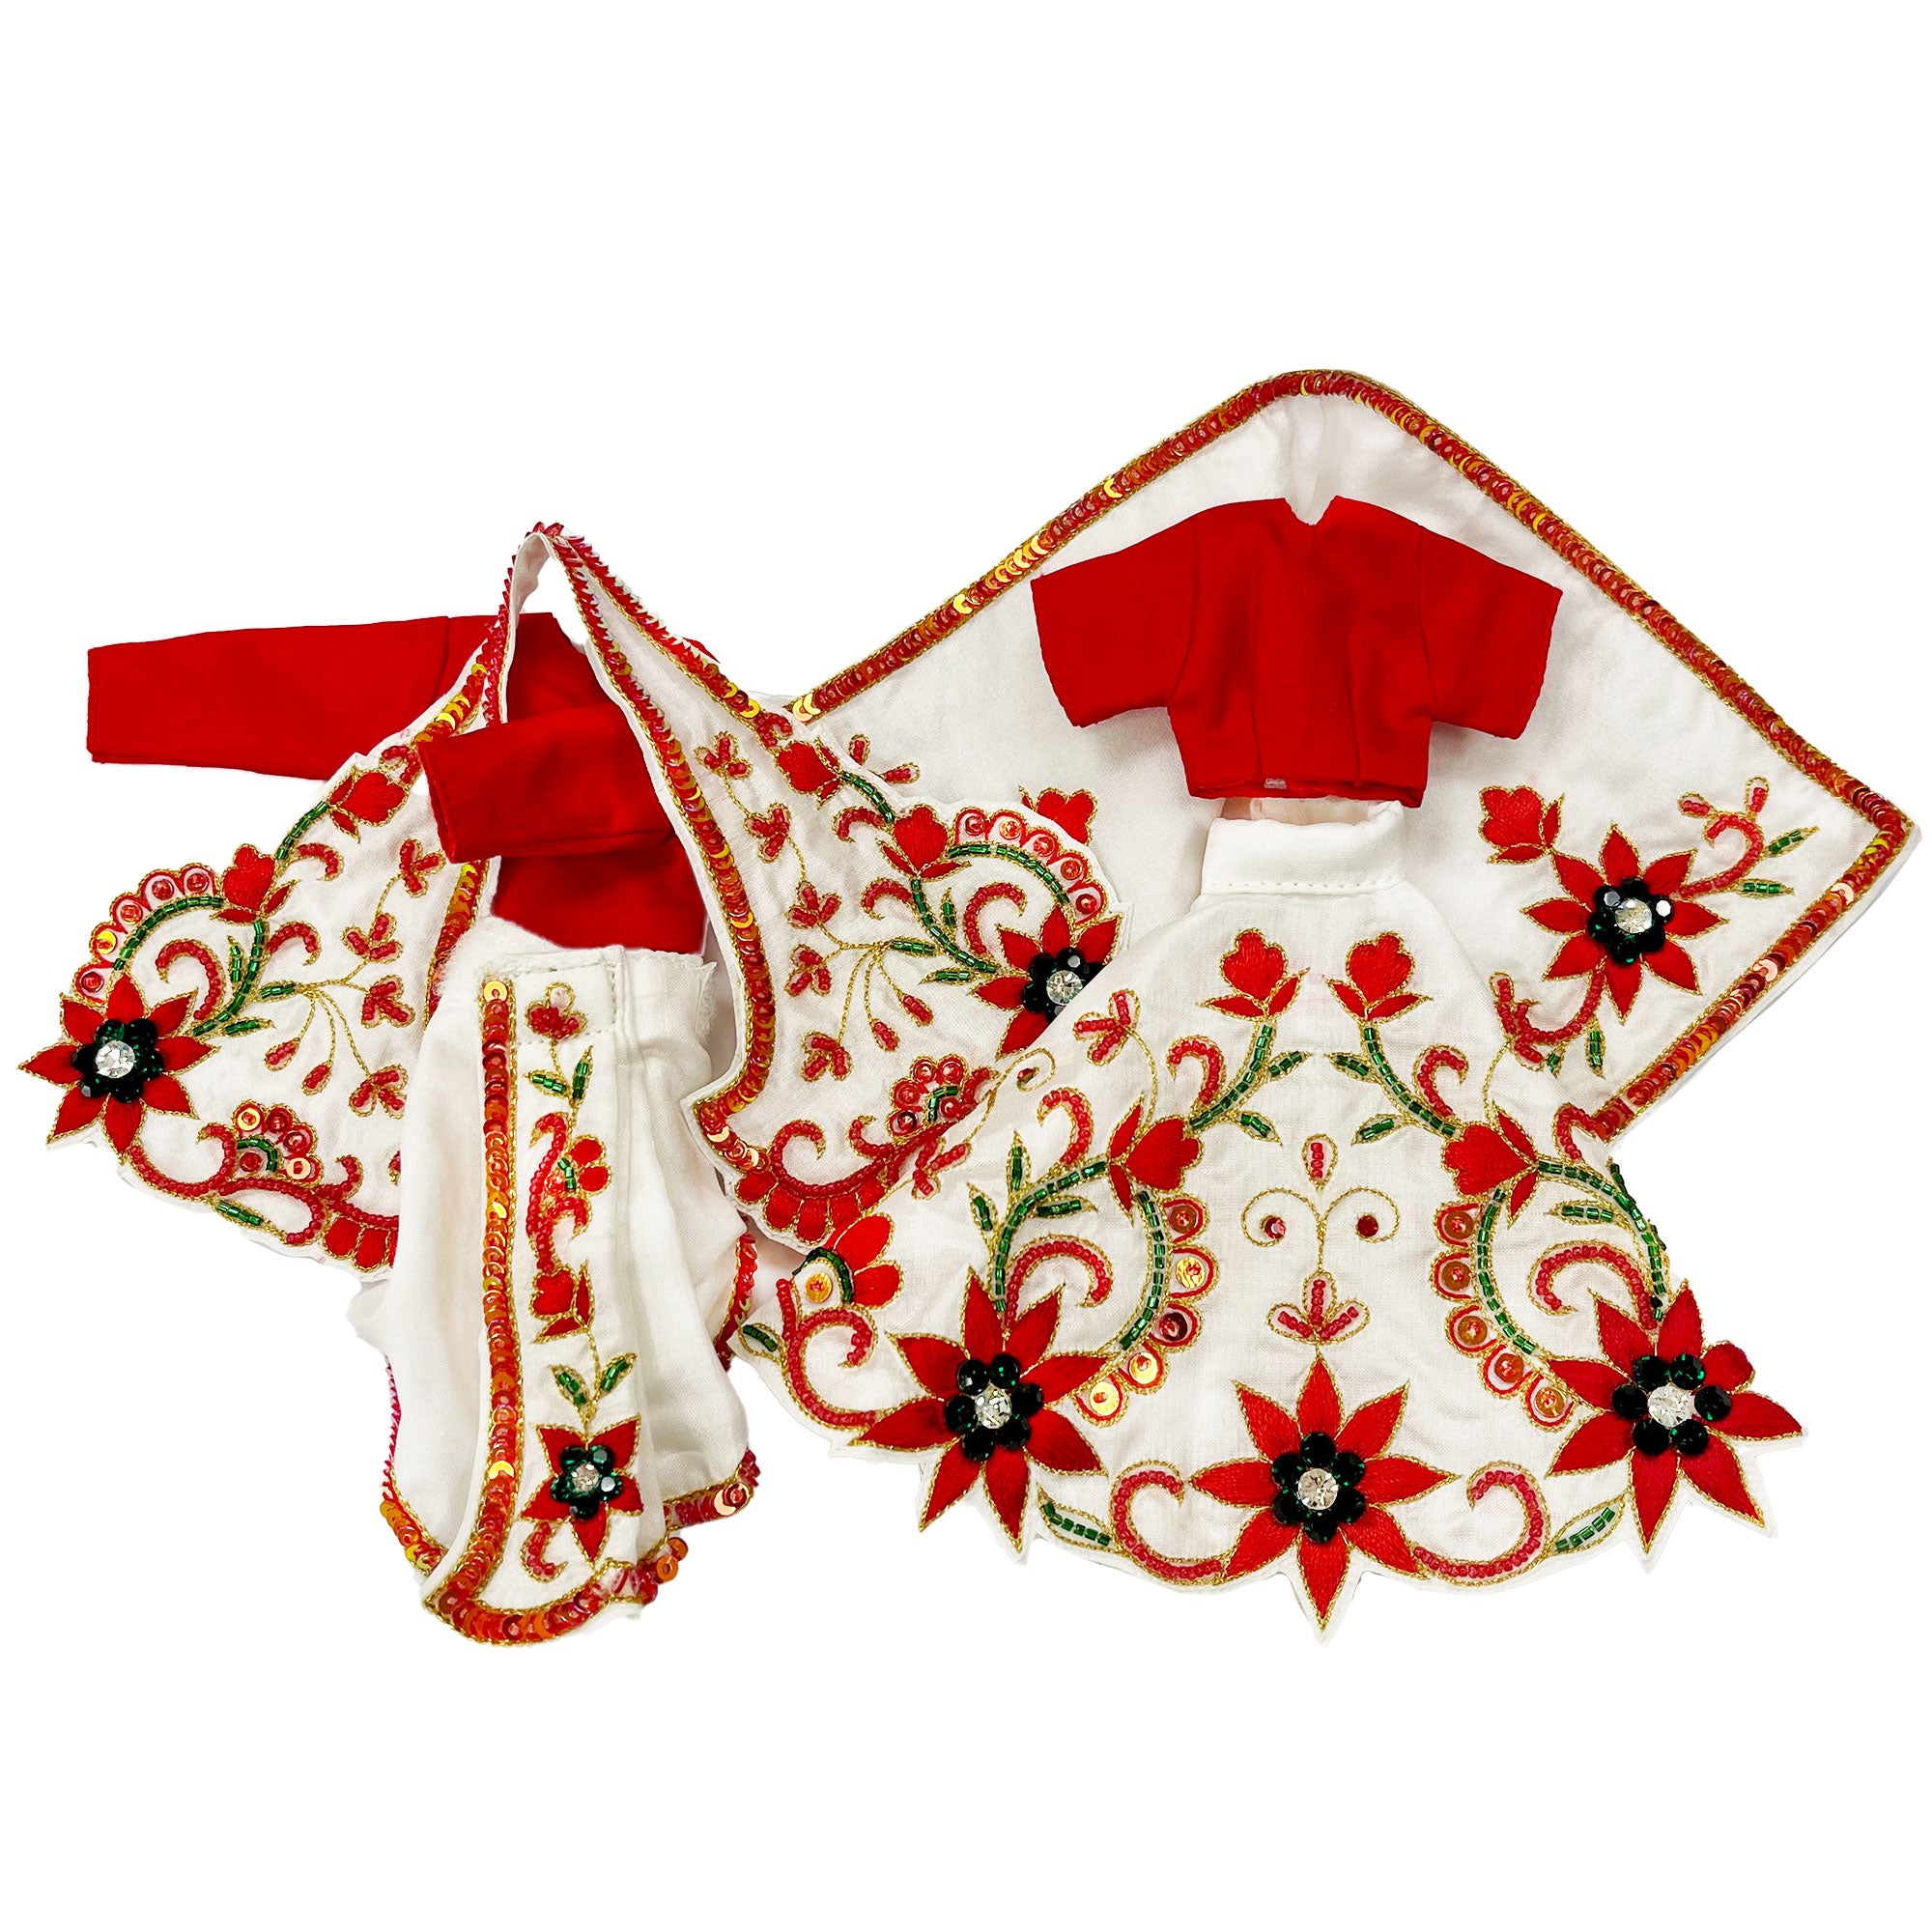 Festival Flowers - White with Red - Silk - Radha Krishna Deity Outfit